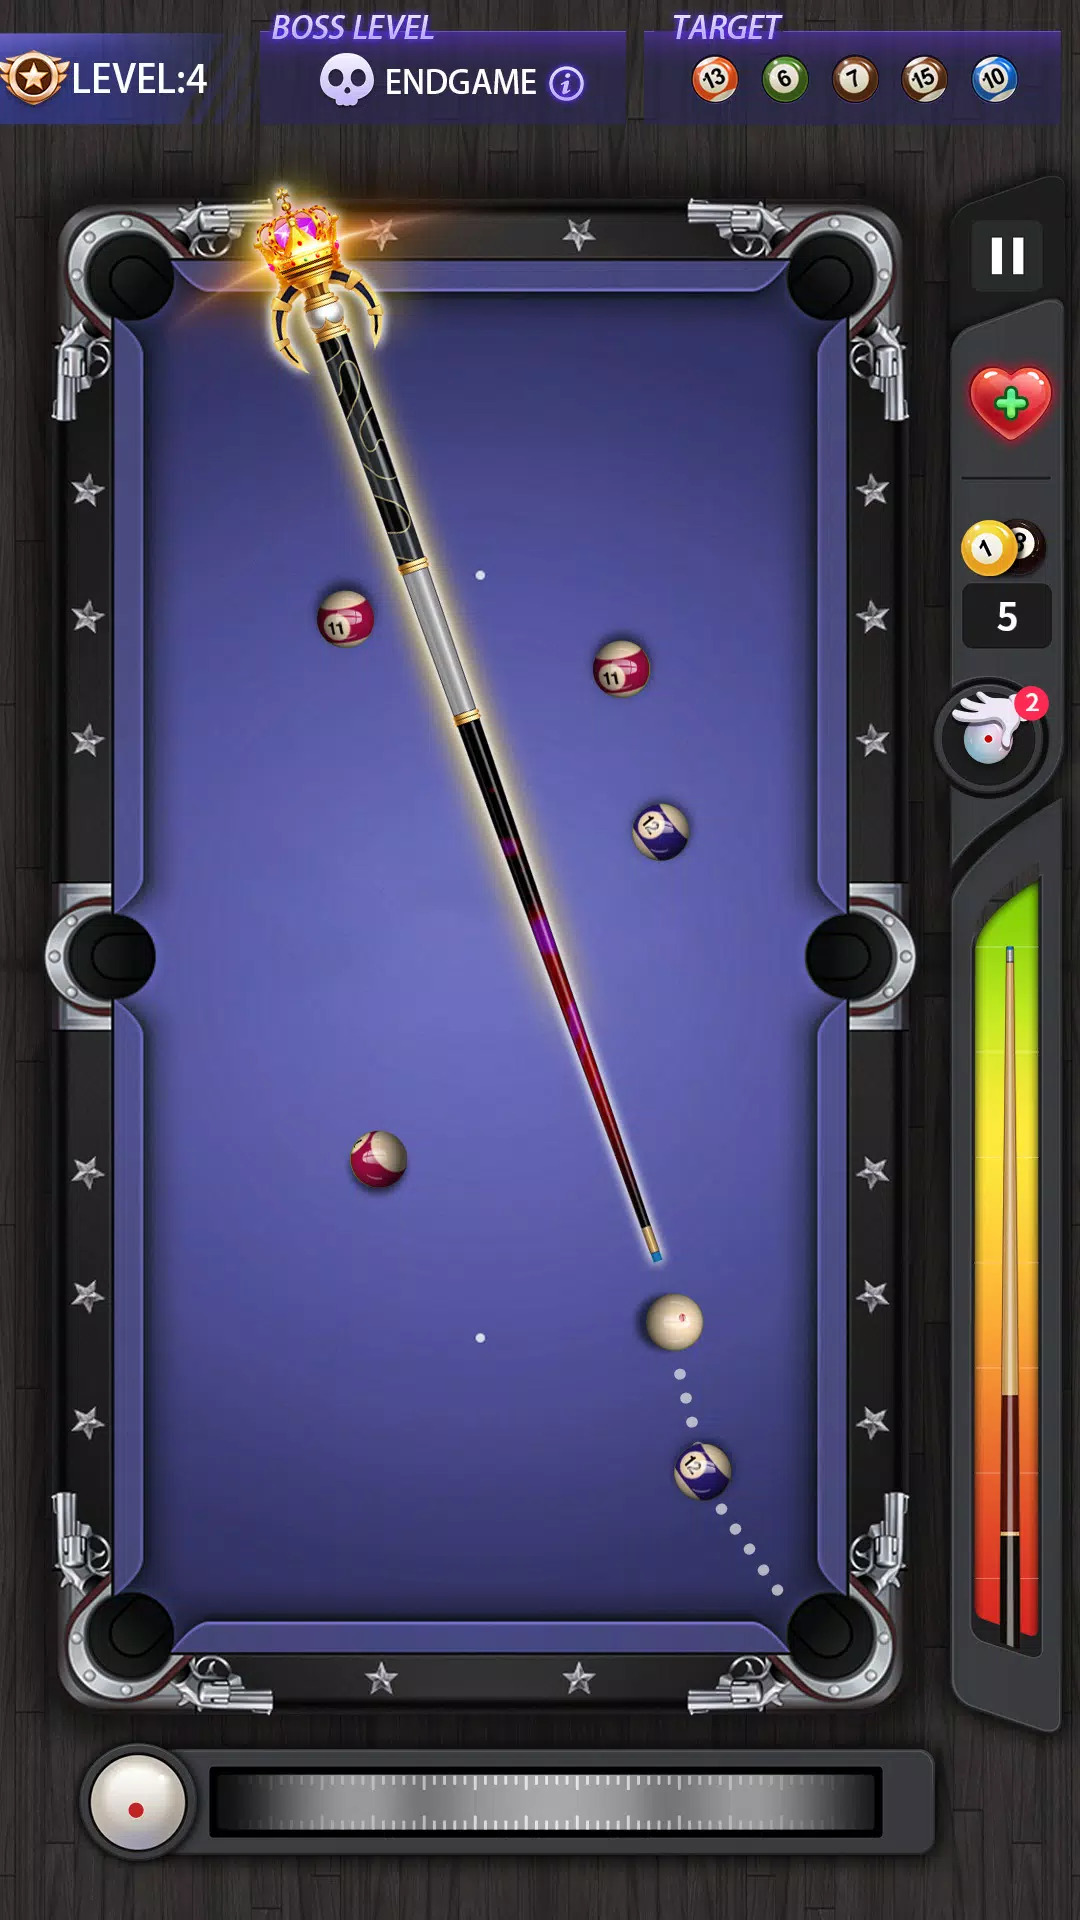 8 Ball Pool Mod APK 5.14.5. Embark on an exhilarating journey with